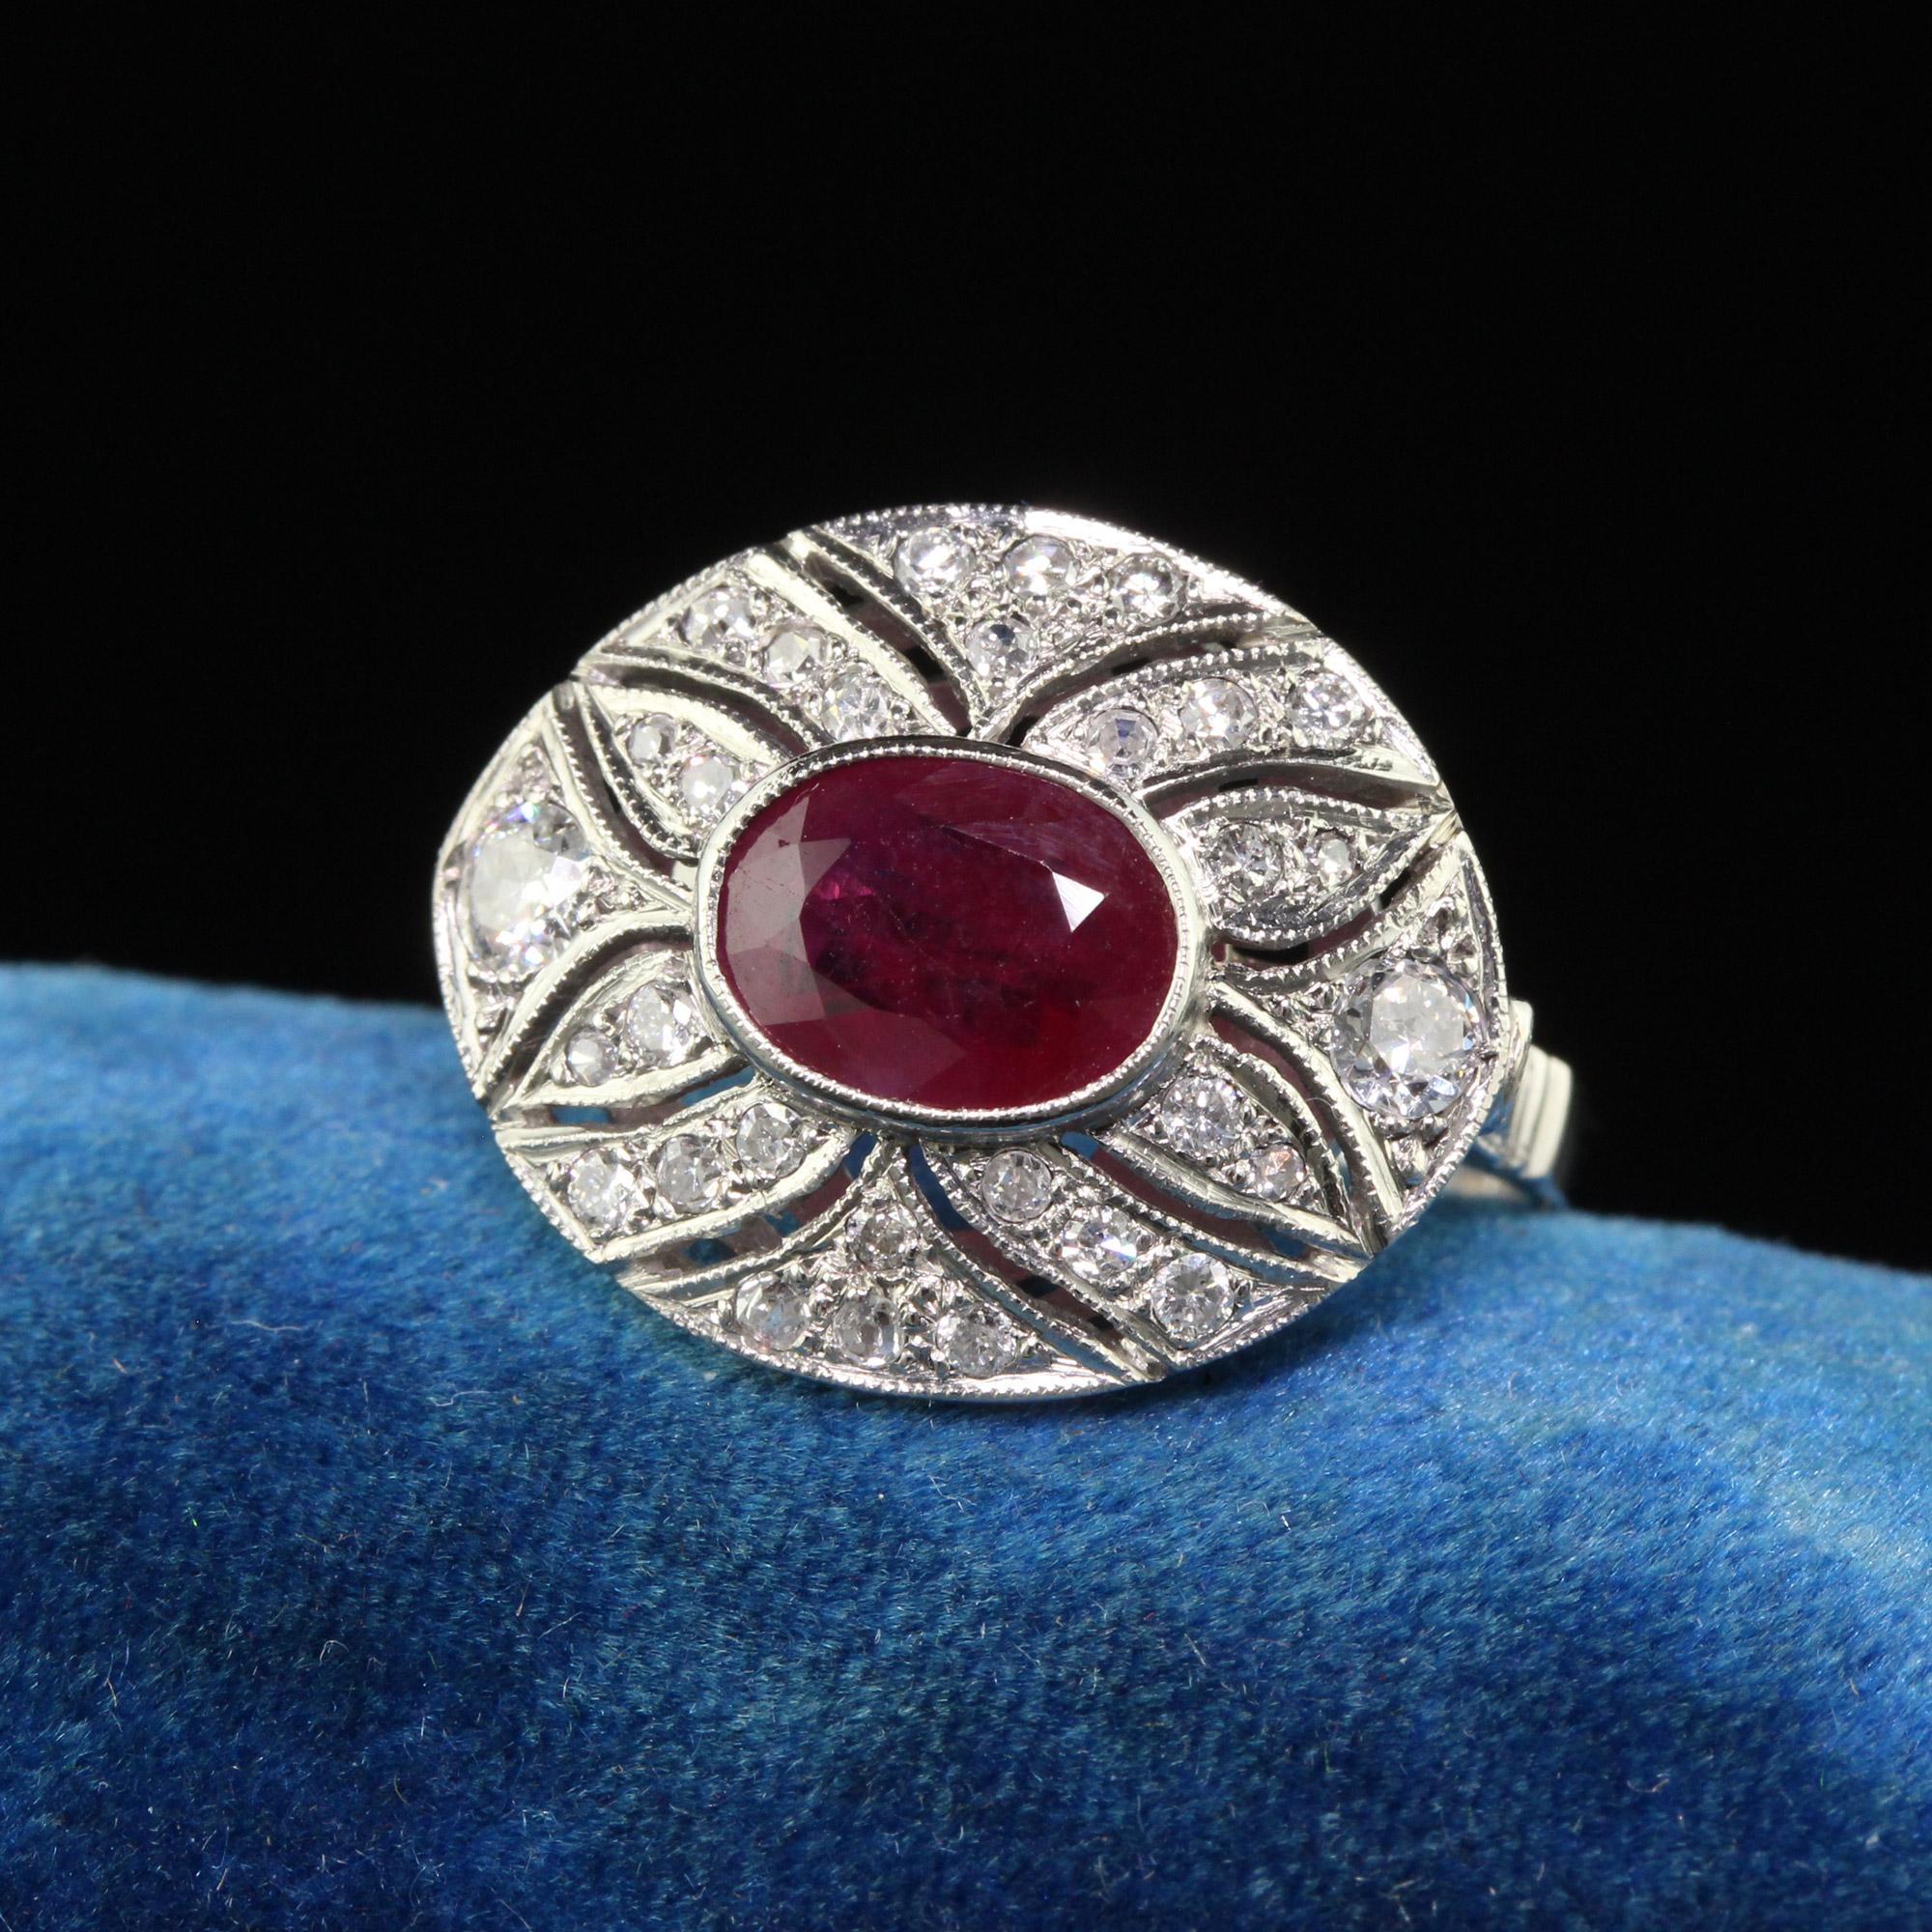 Beautiful Contemporary Art Deco Style Platinum Ruby and Diamond Cocktail Ring. This beautiful ring is crafted of platinum. The center holds a natural red ruby and is surrounded by white single cut diamonds. The craftsmanship is beautiful and very